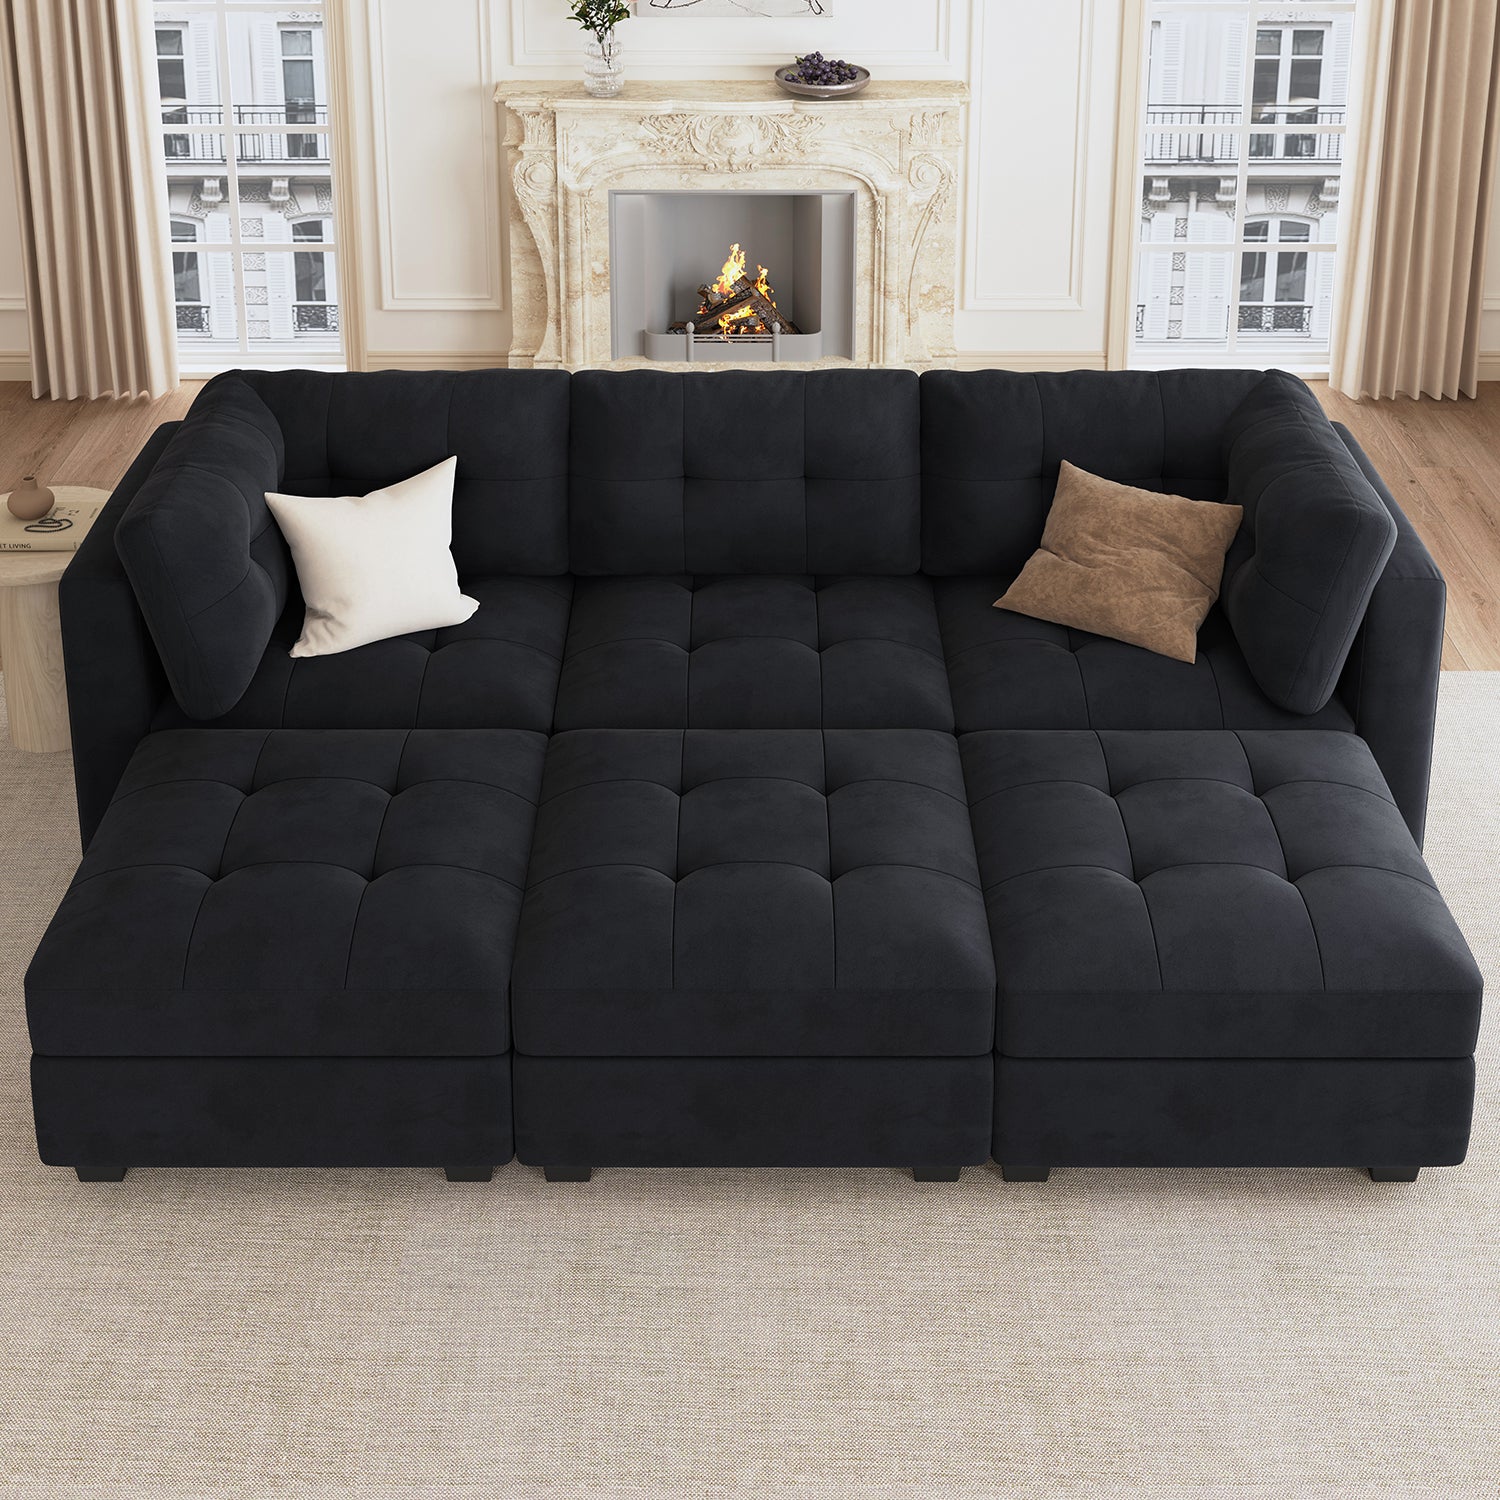 Modular Sleeper Sectional With Storage Seat